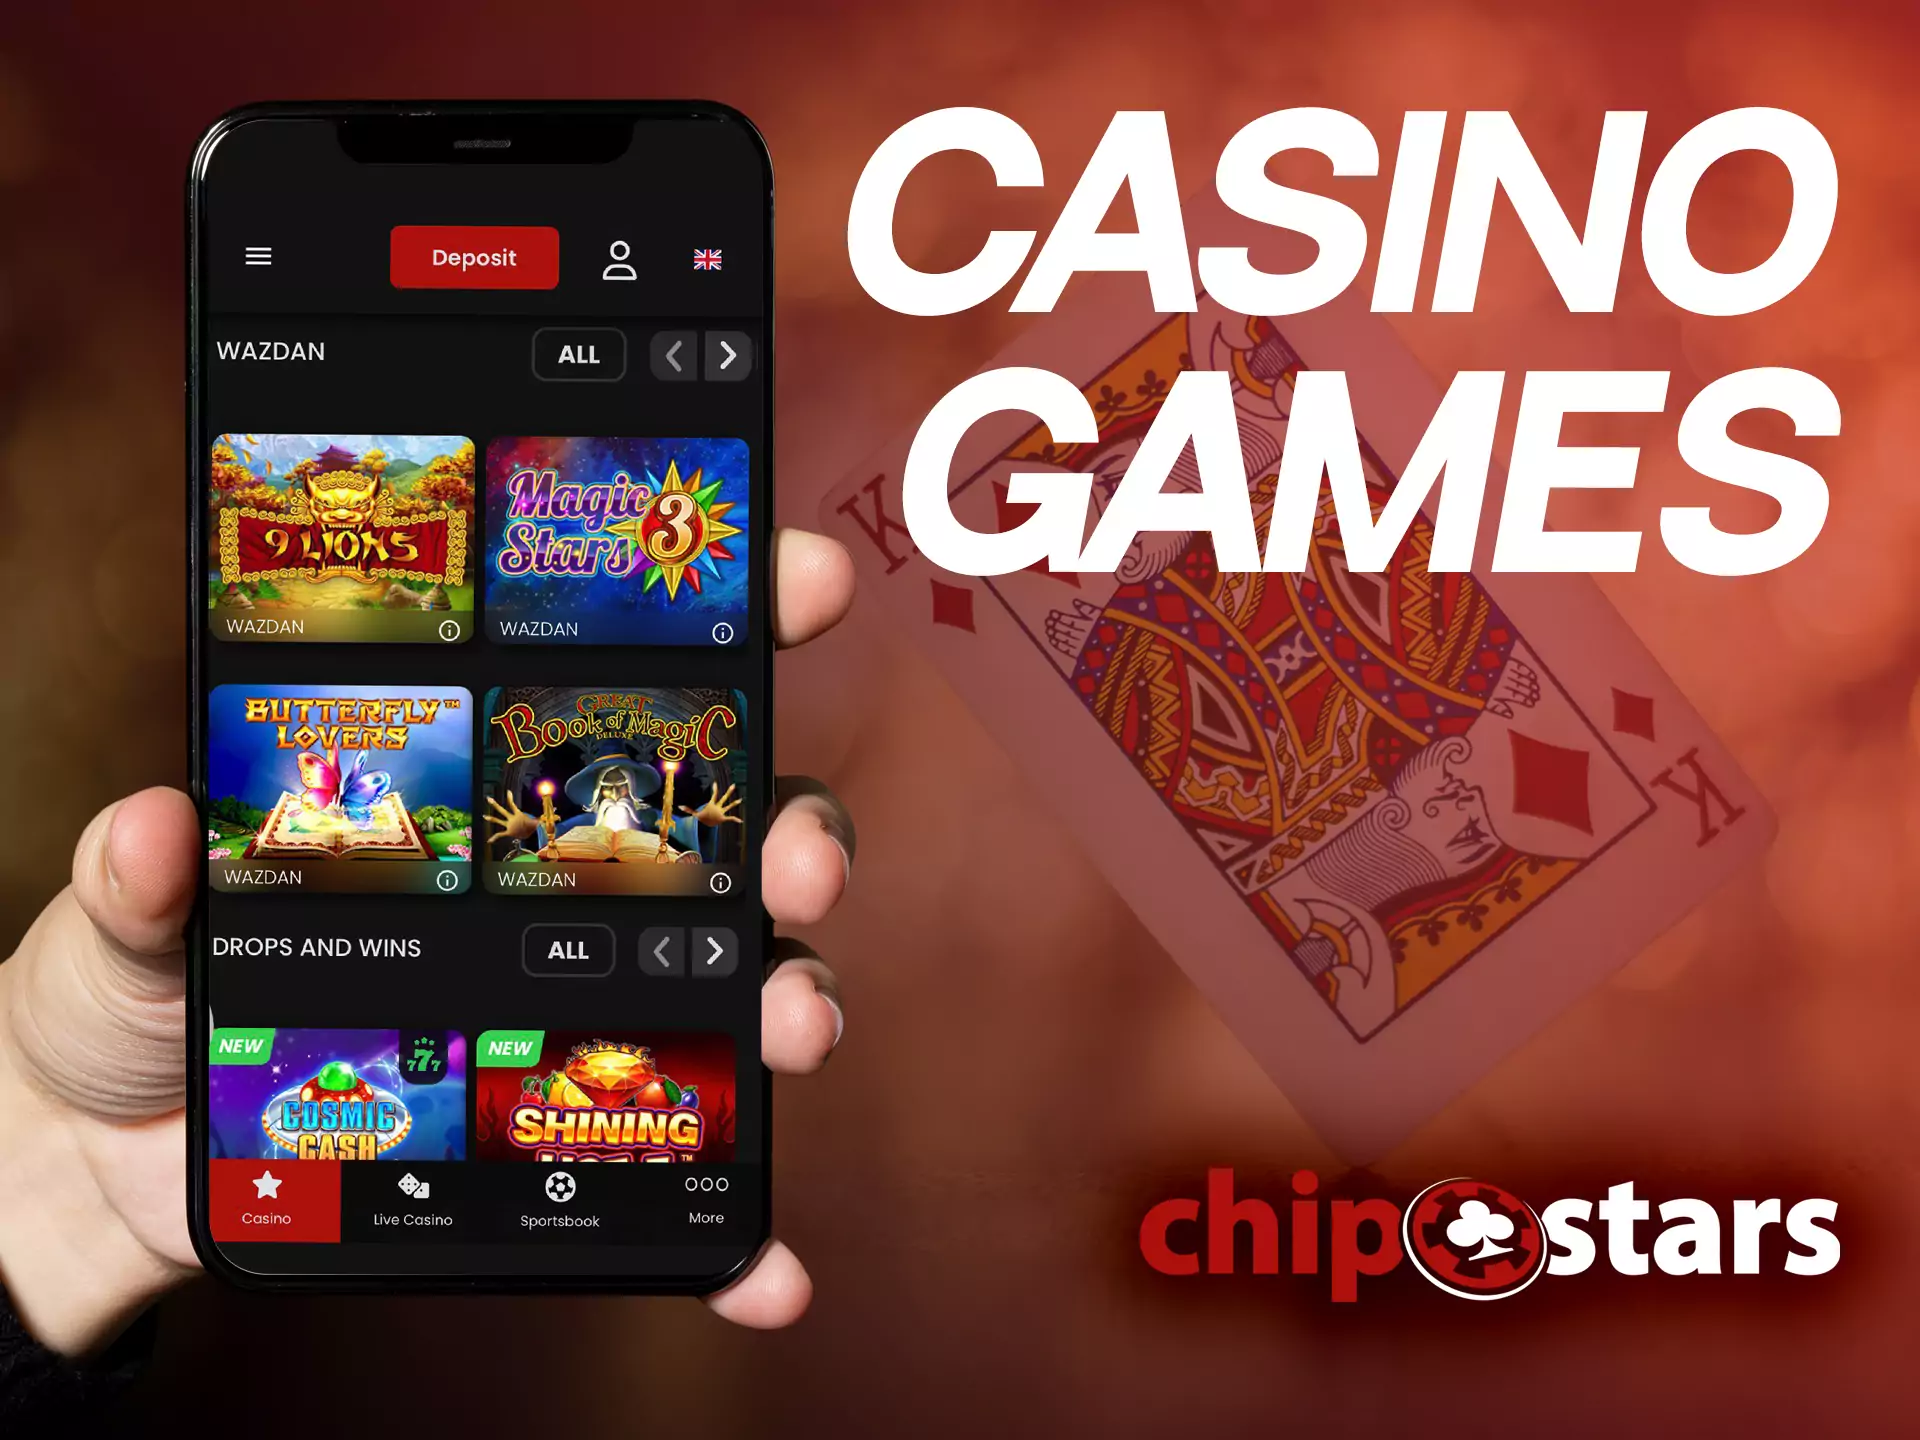 In the Chipstars Casino, users play slots, poker, blackjack and other fortune games.